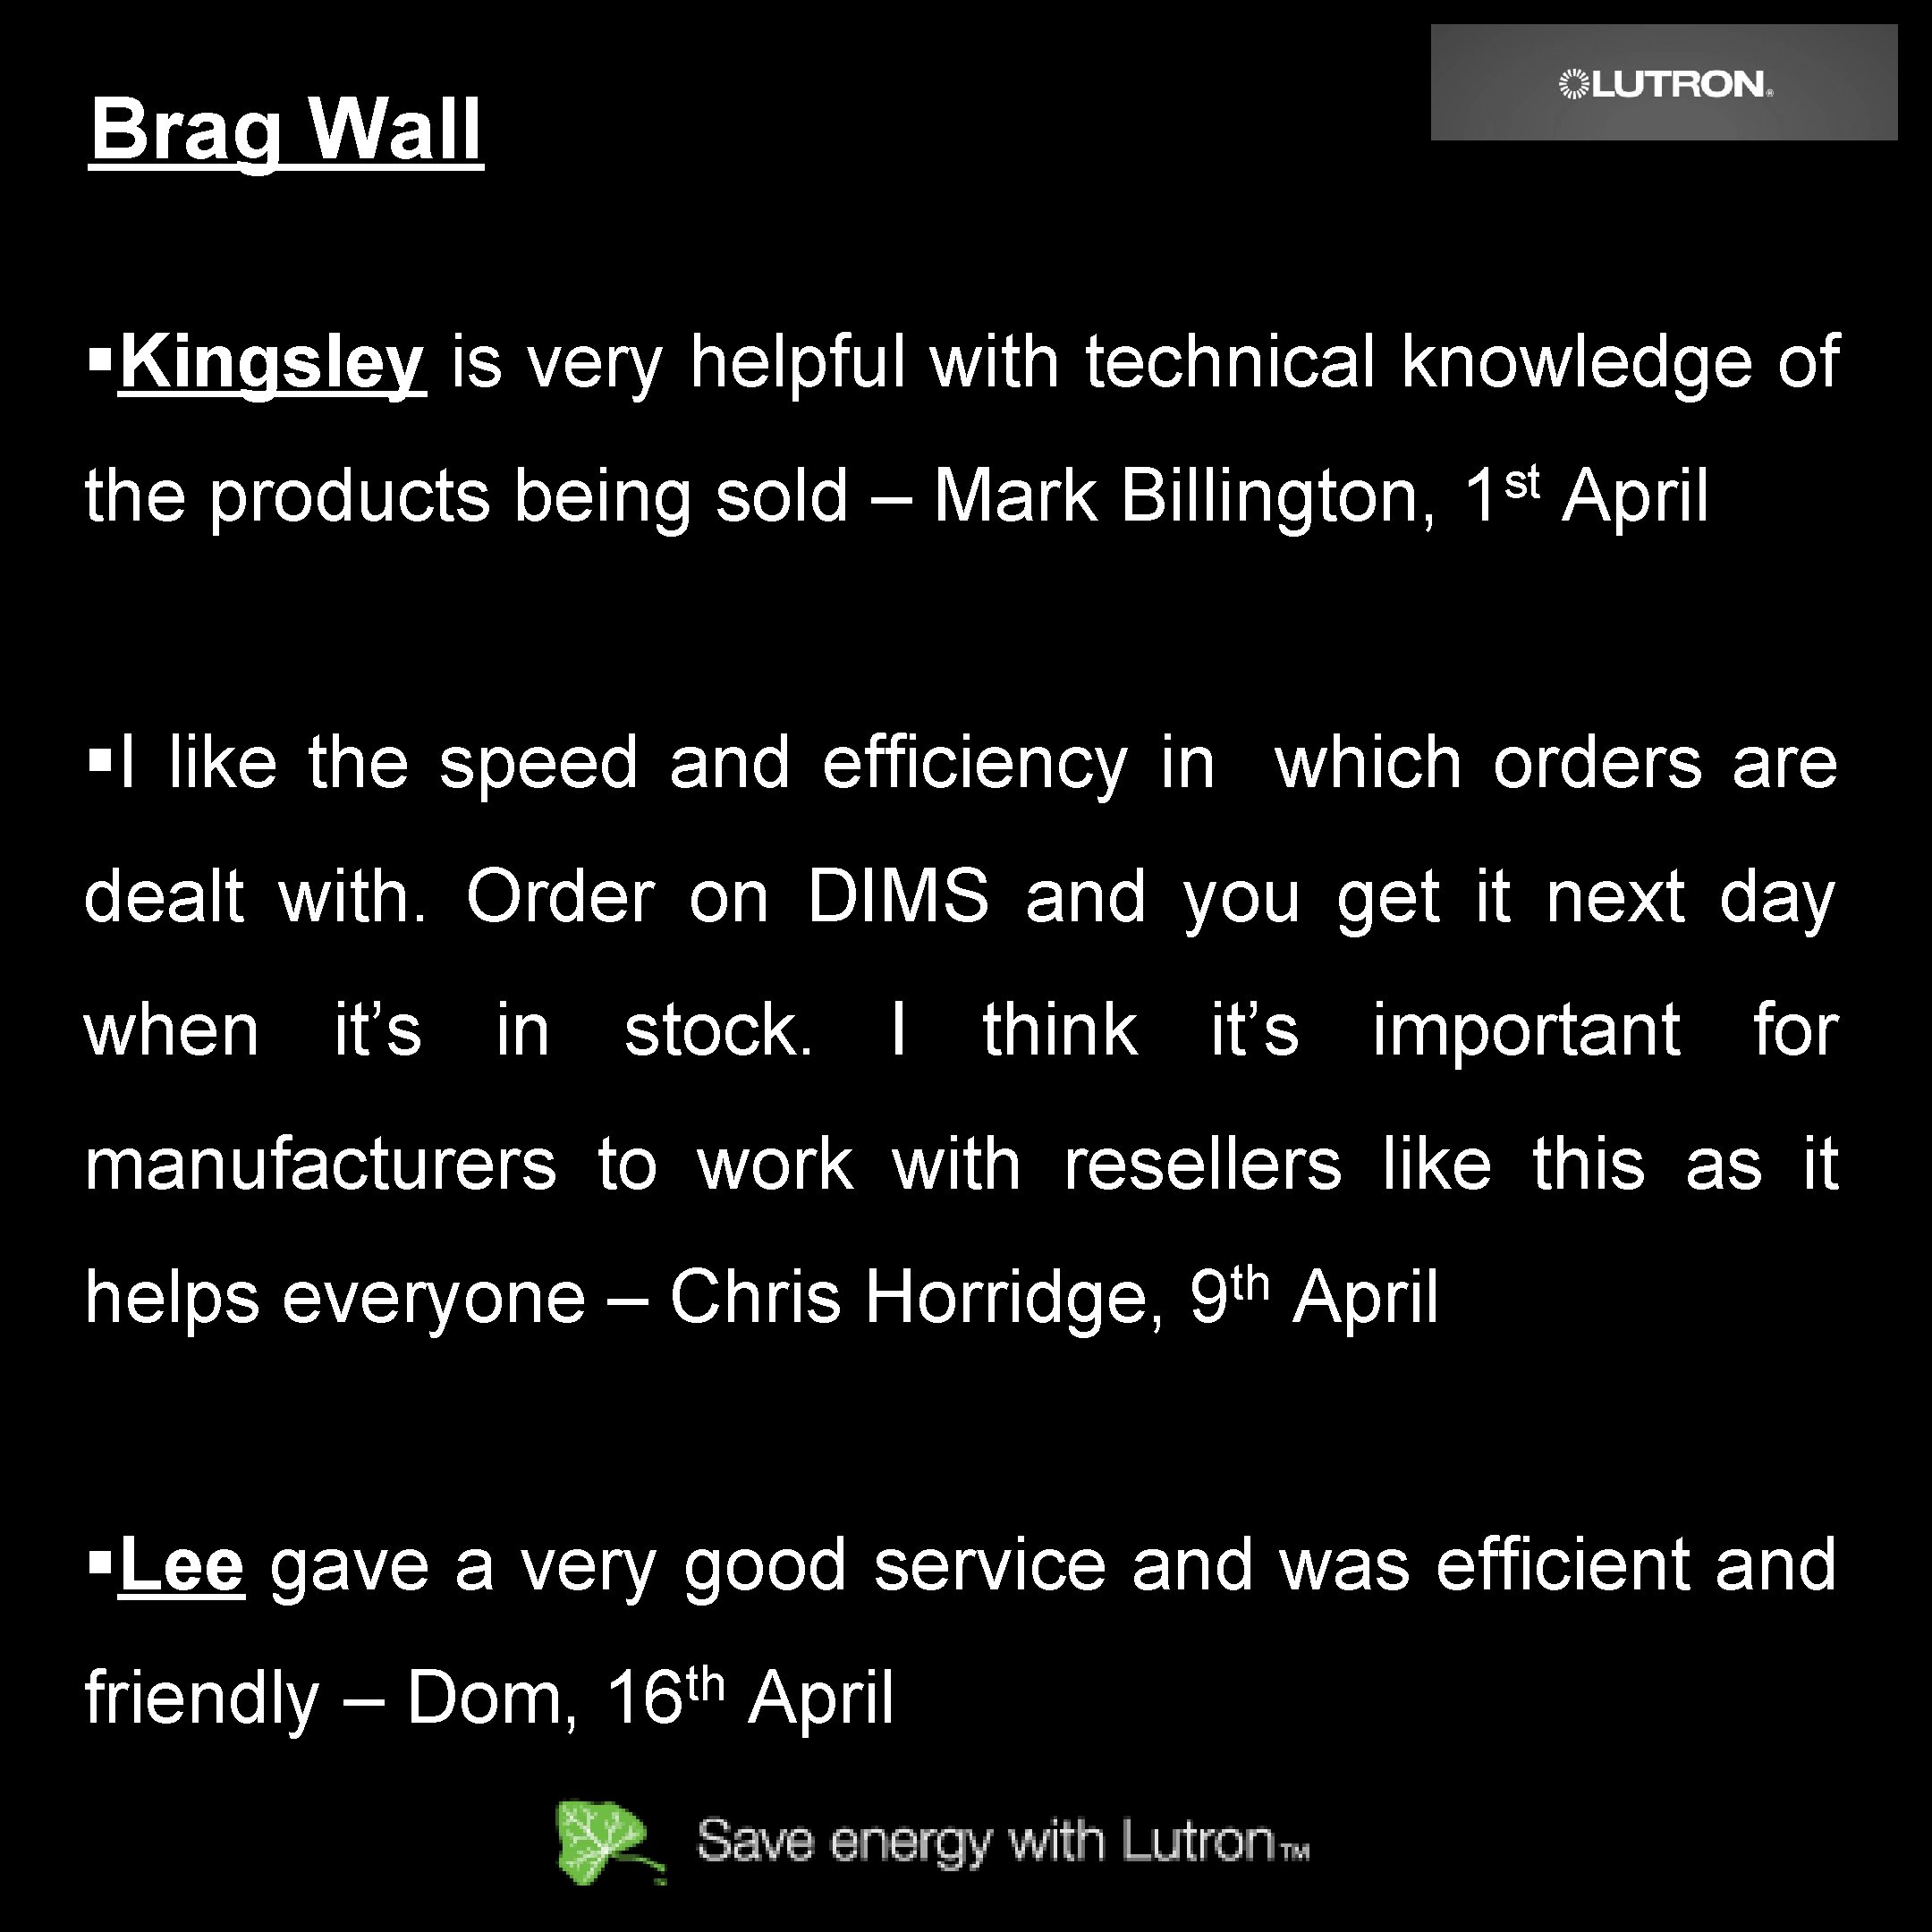 Brag Wall §Kingsley is very helpful with technical knowledge of the products being sold